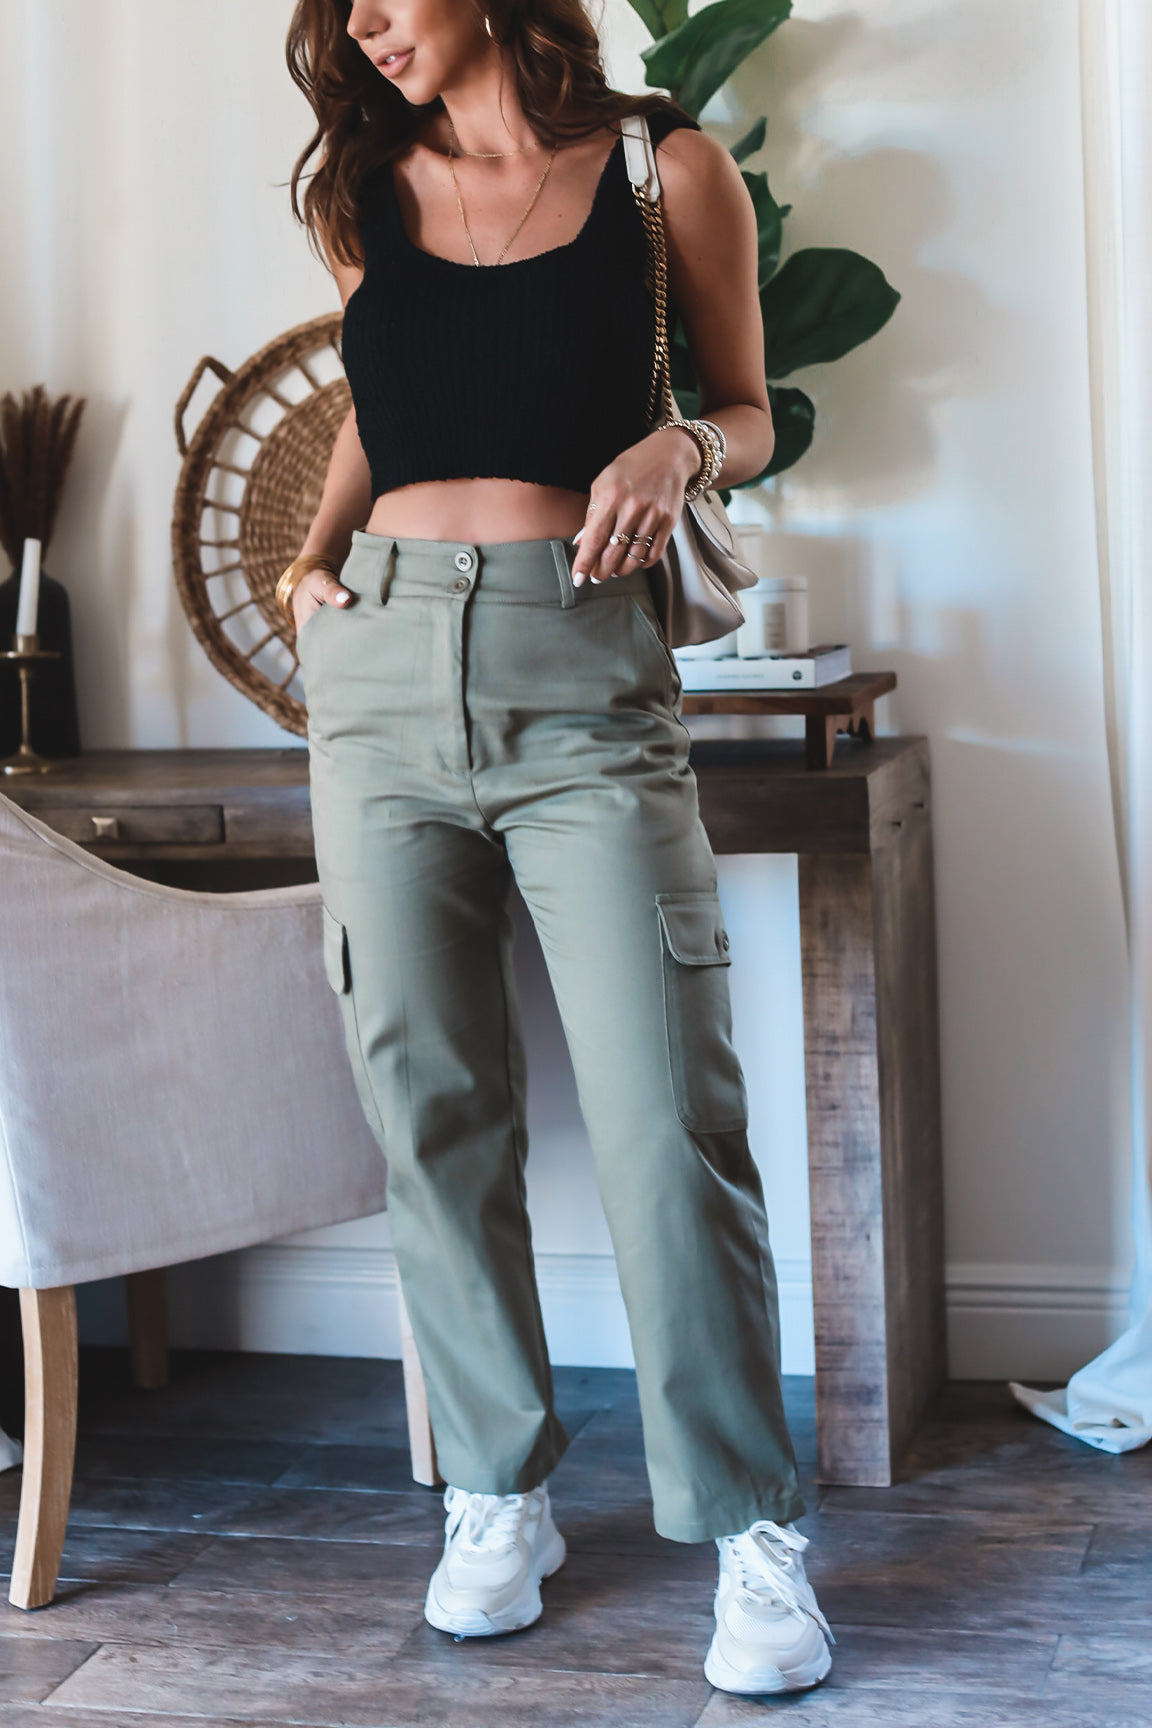 Green Cargo Pants, Strapless Top. - The Hunter Collector